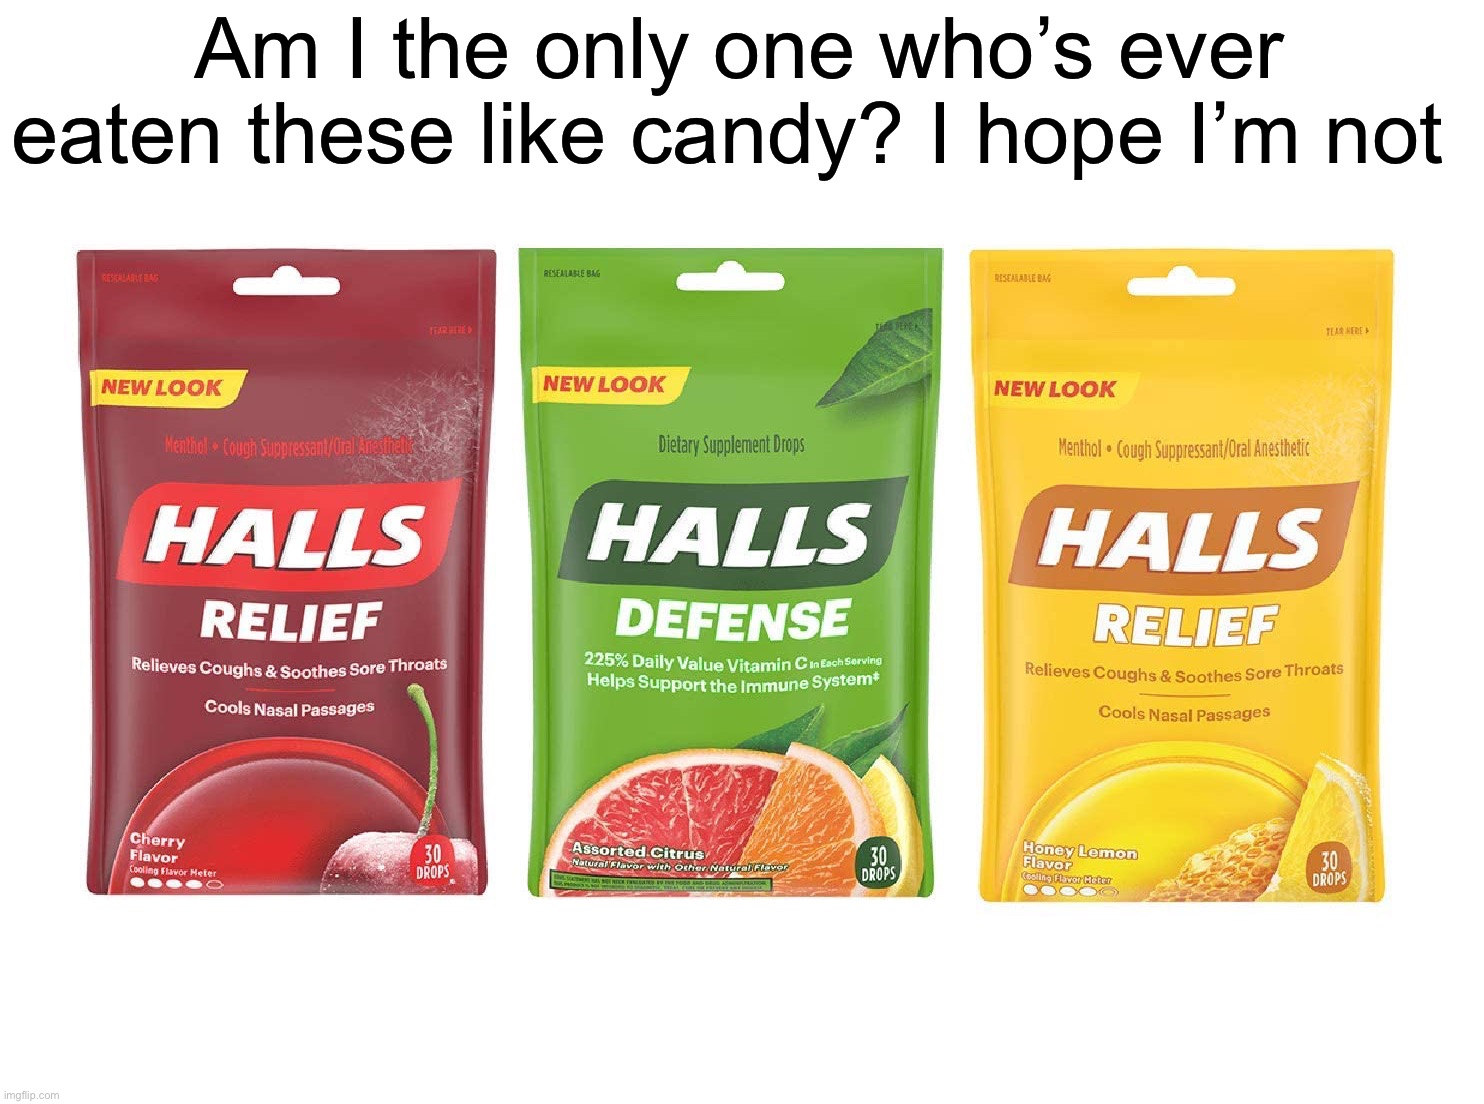 Am I the only one? | Am I the only one who’s ever eaten these like candy? I hope I’m not | image tagged in memes,funny,true story,relatable memes,candy,funny memes | made w/ Imgflip meme maker